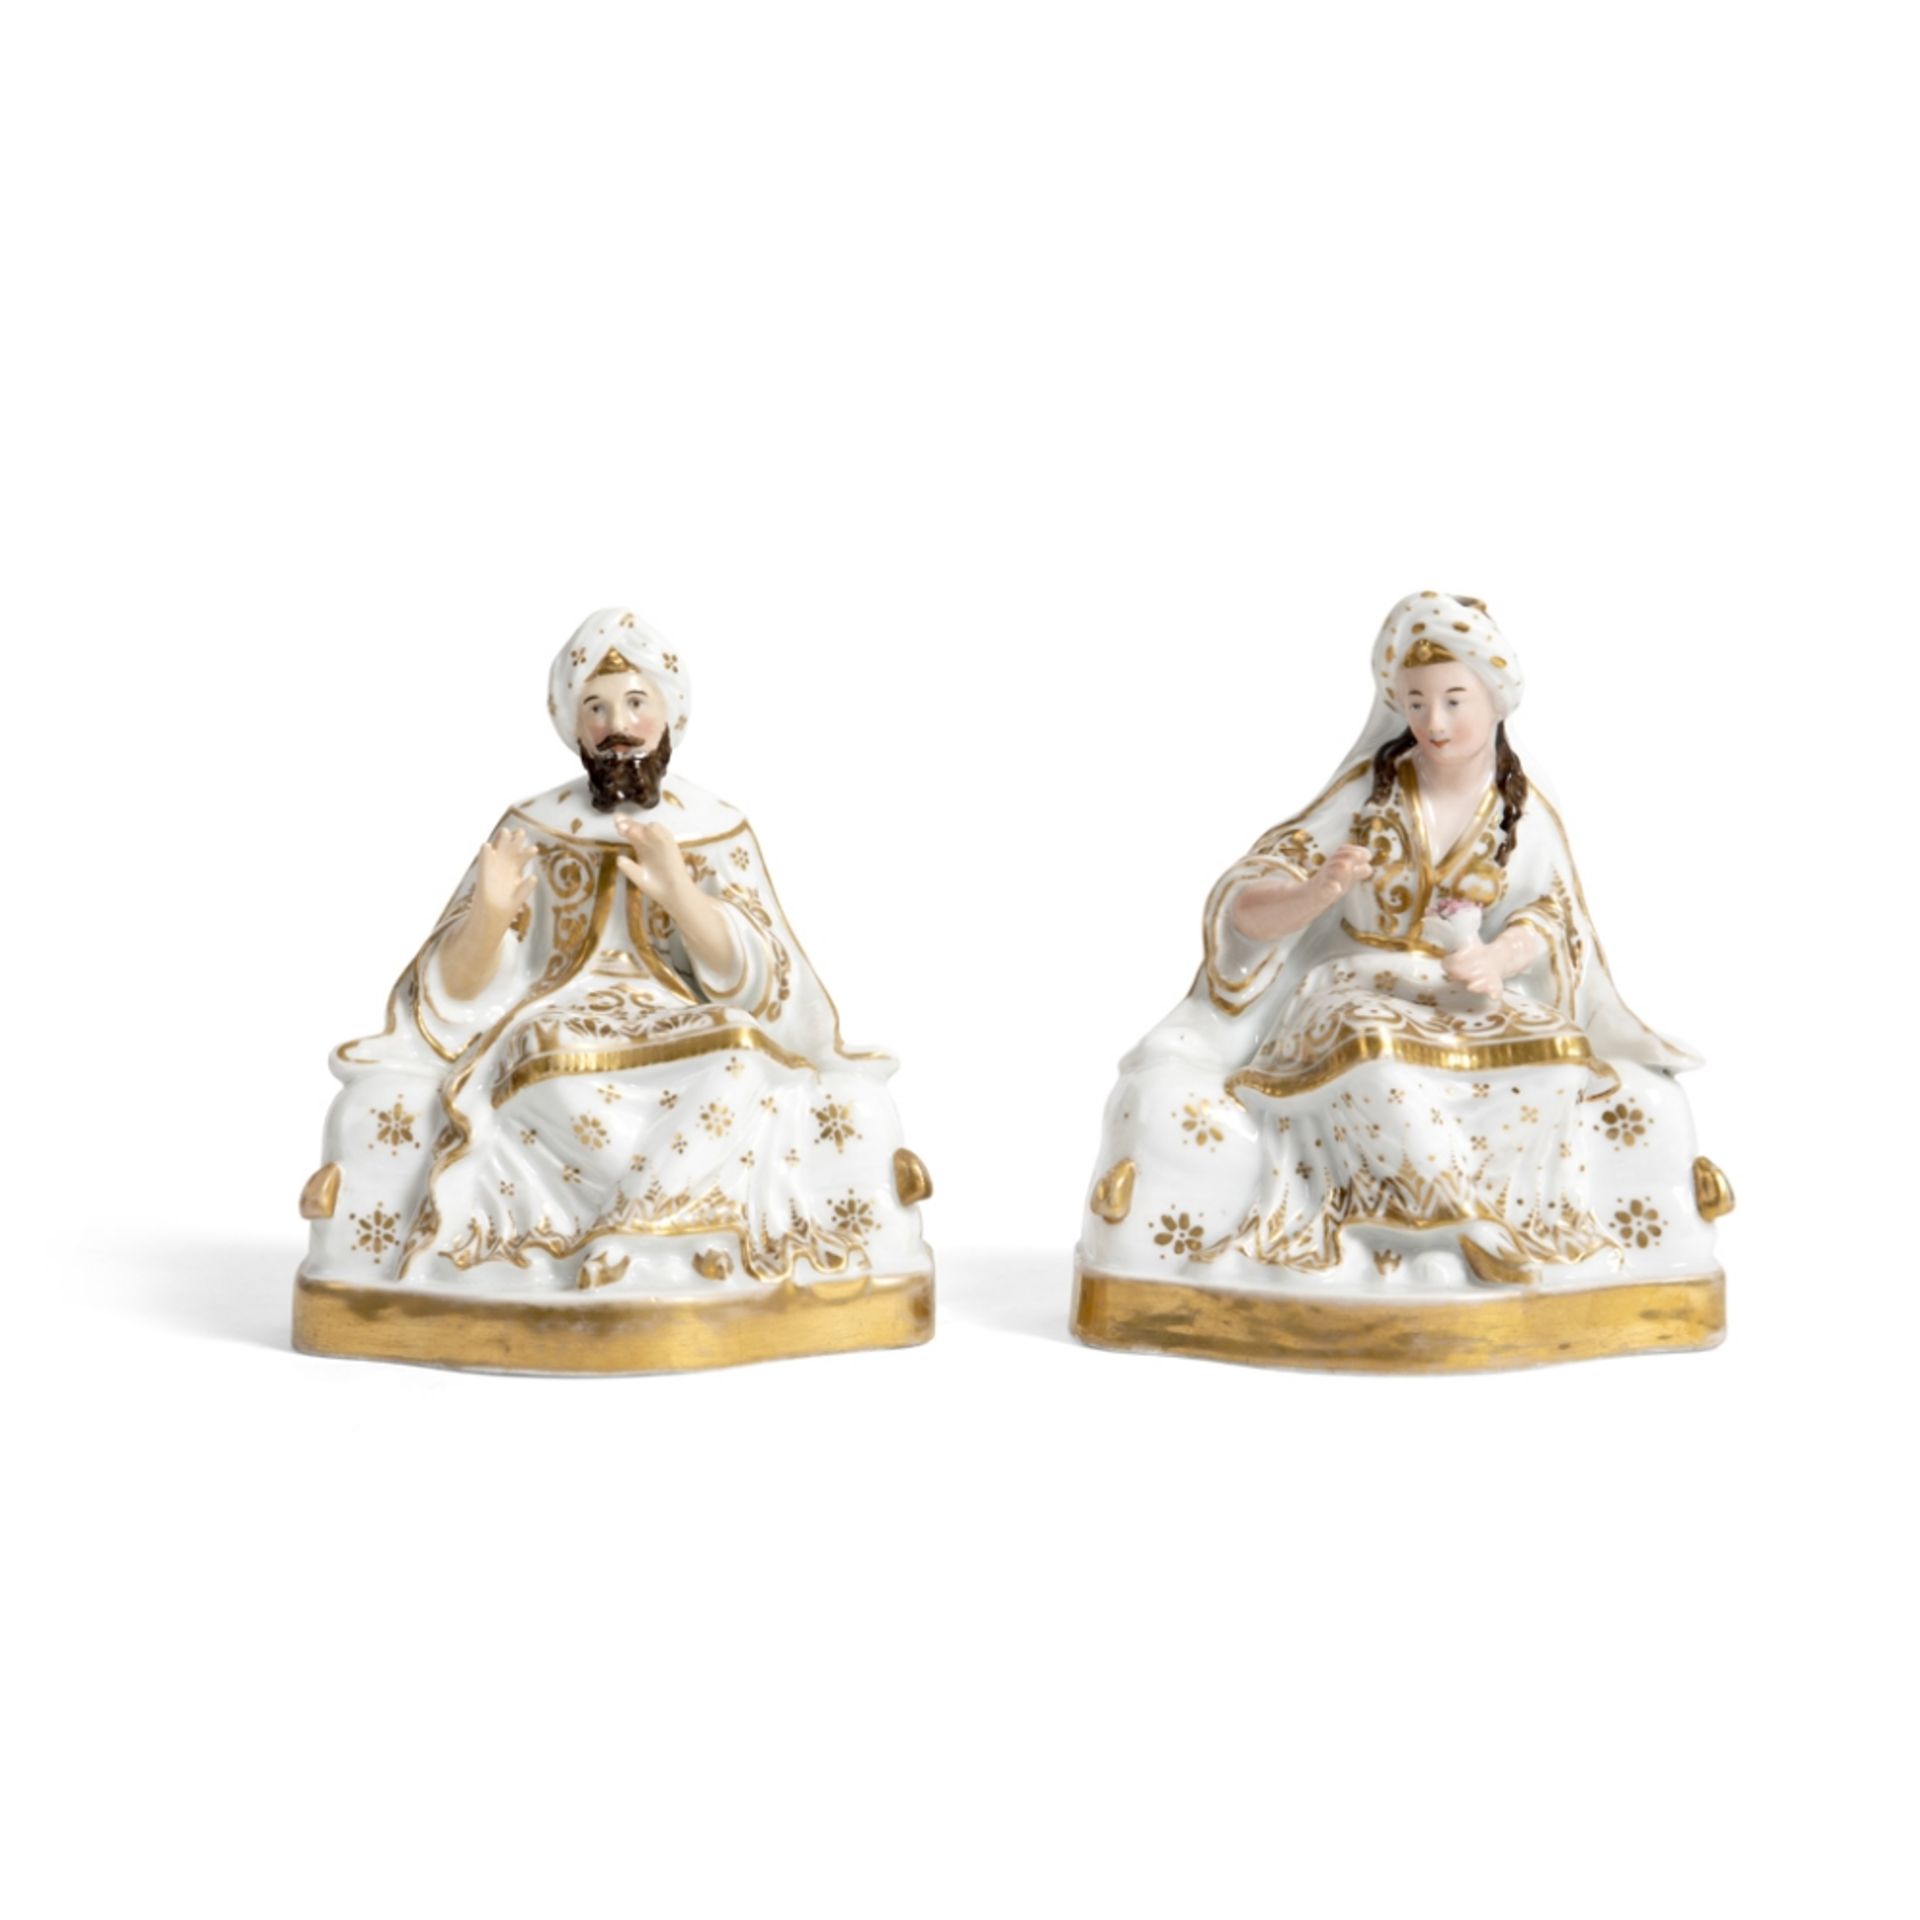 PAIR OF 'PORCELAINE DE PARIS' OTTOMAN FIGURES OF A SULTAN AND SULTANAFRANCE MADE FOR THE TURKISH